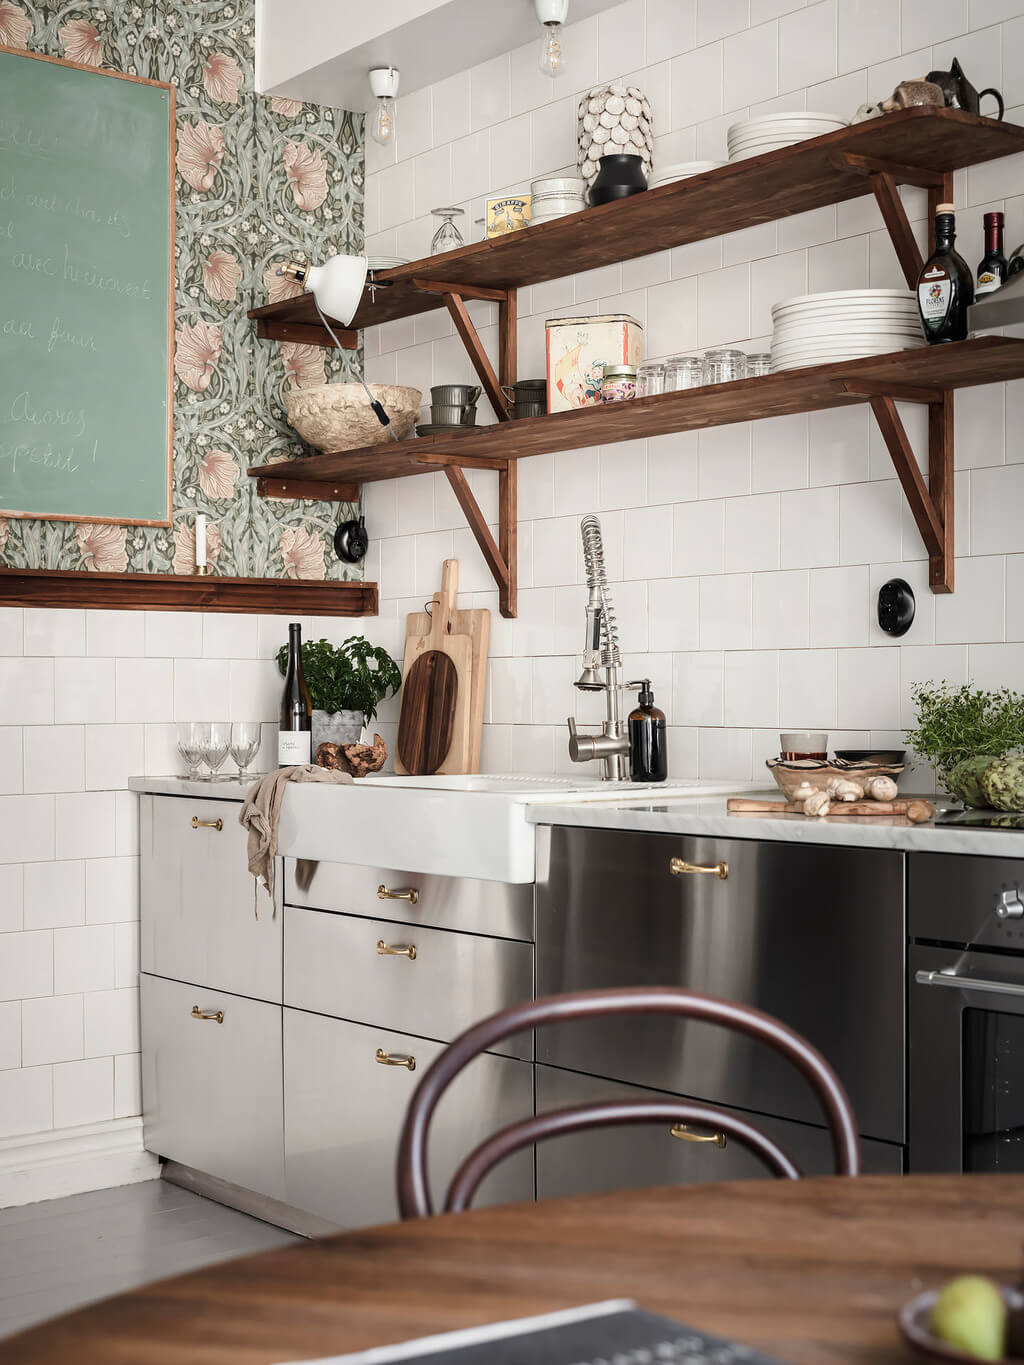 A Scandi Home with Stainless Steel Kitchen and Wallpaper